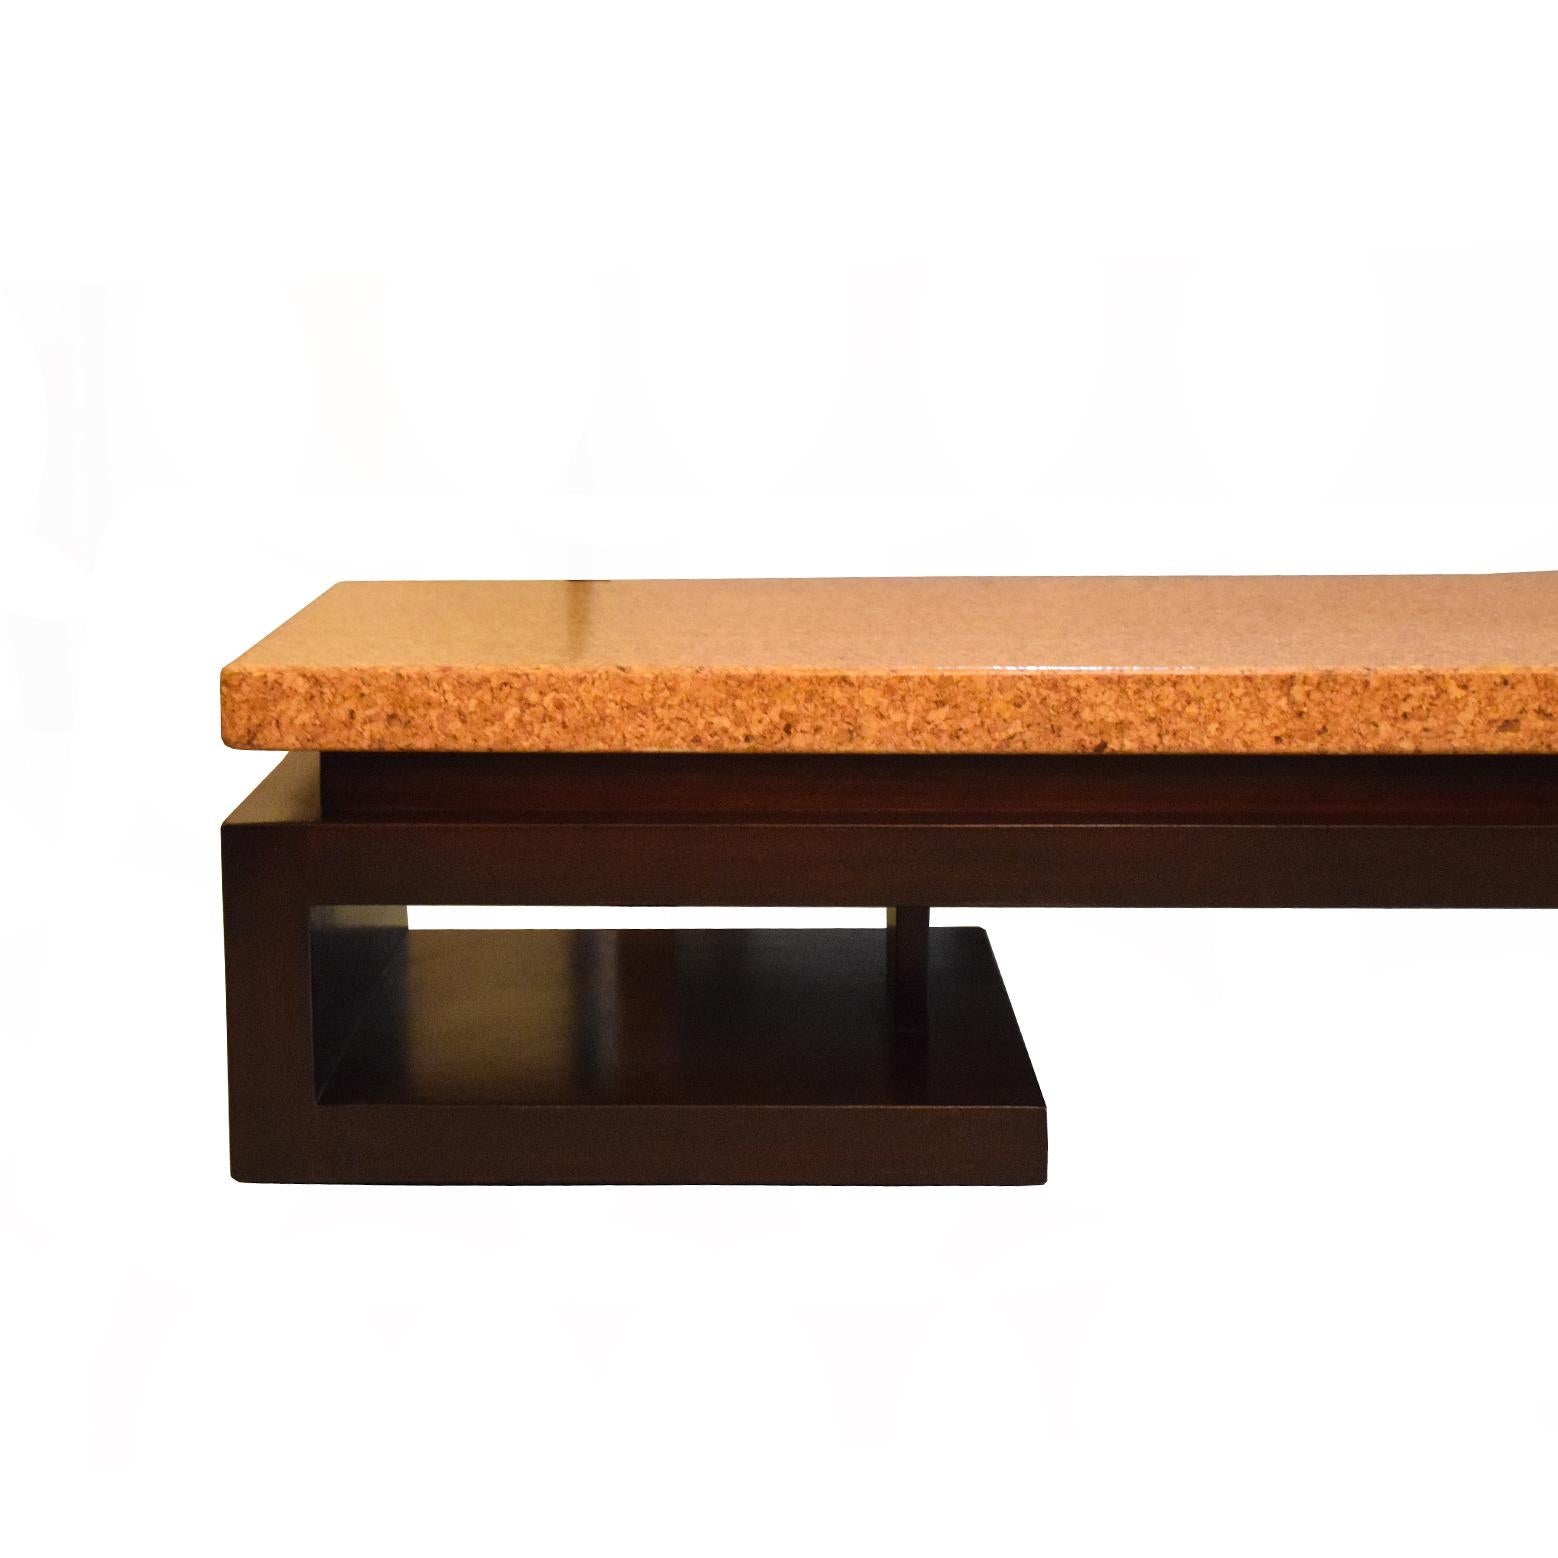 Paul Frankl Low Cork Table/Bench 1940’s Fot Johnson Furniture Co. In Good Condition For Sale In Hudson, NY